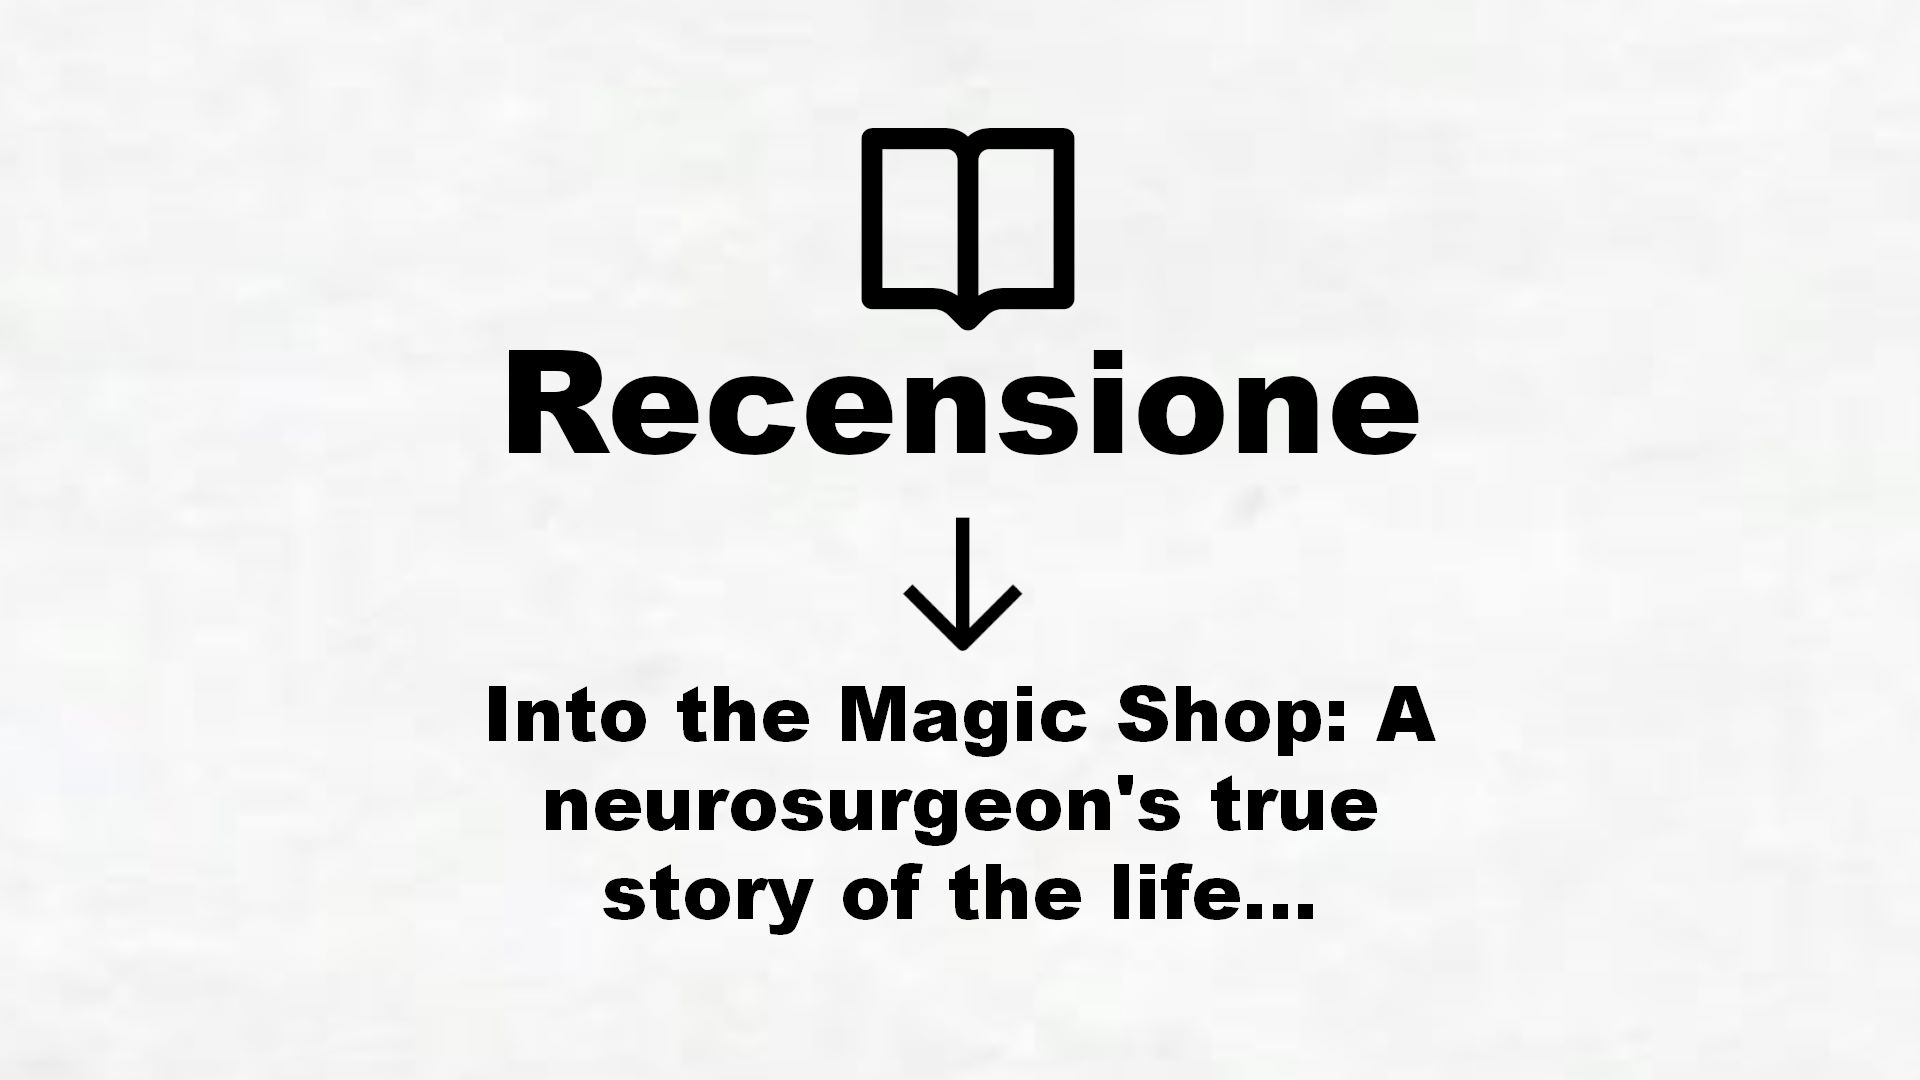 Into the Magic Shop: A neurosurgeon’s true story of the life-changing magic of compassion and mindfulness – Recensione Libro